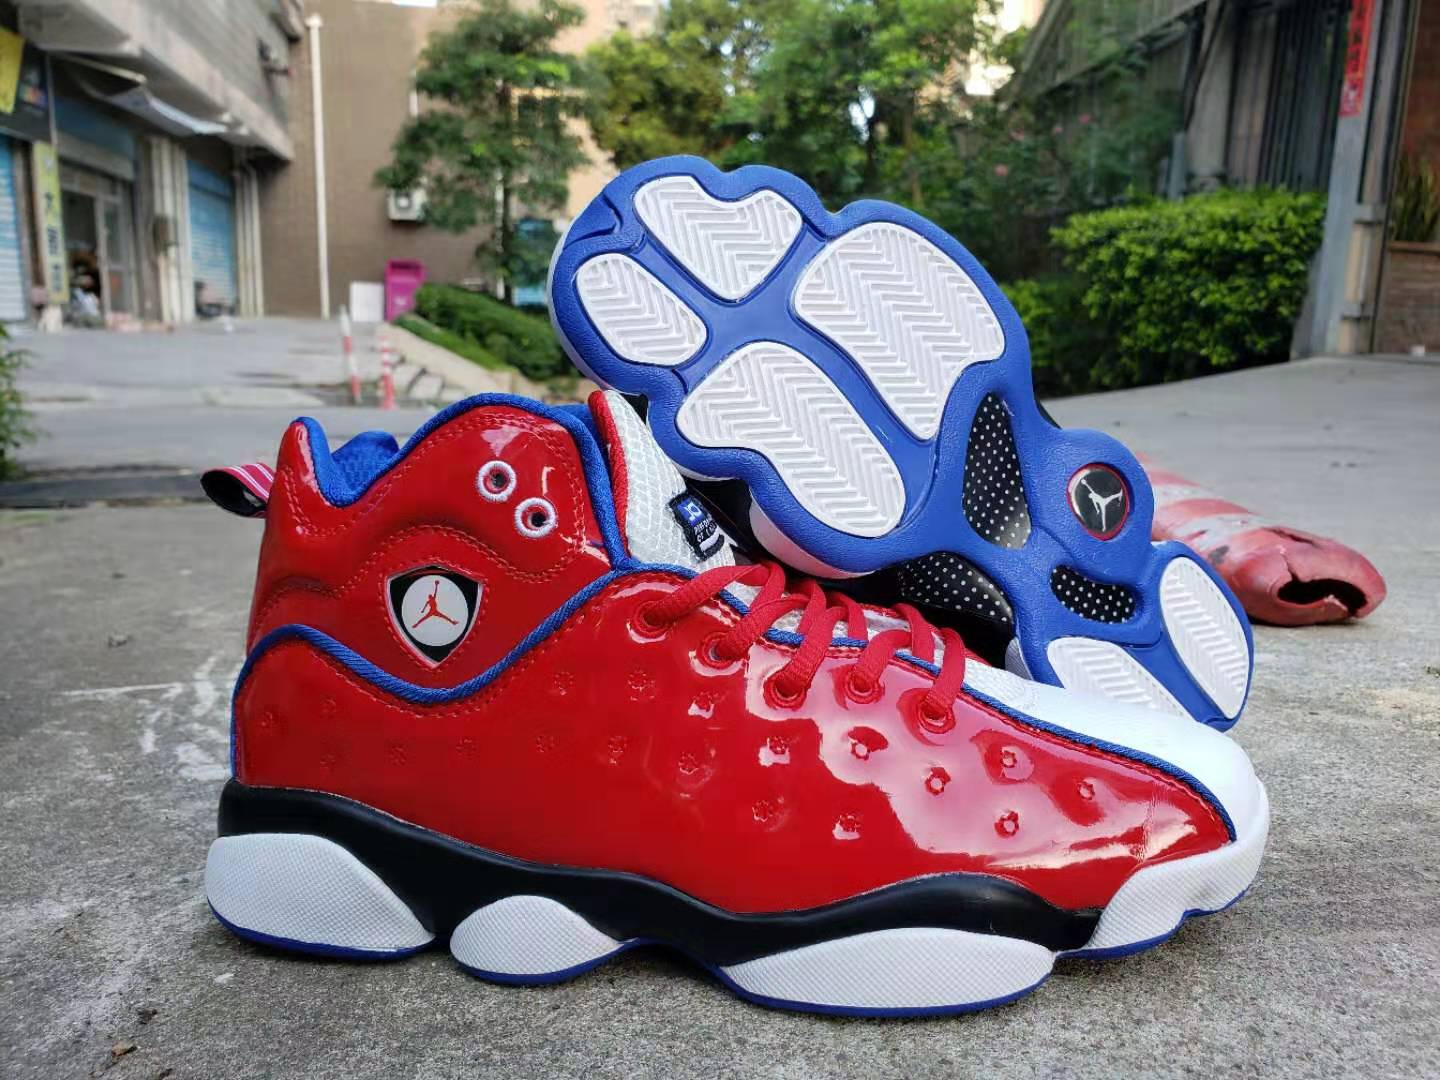 jordans with red and blue